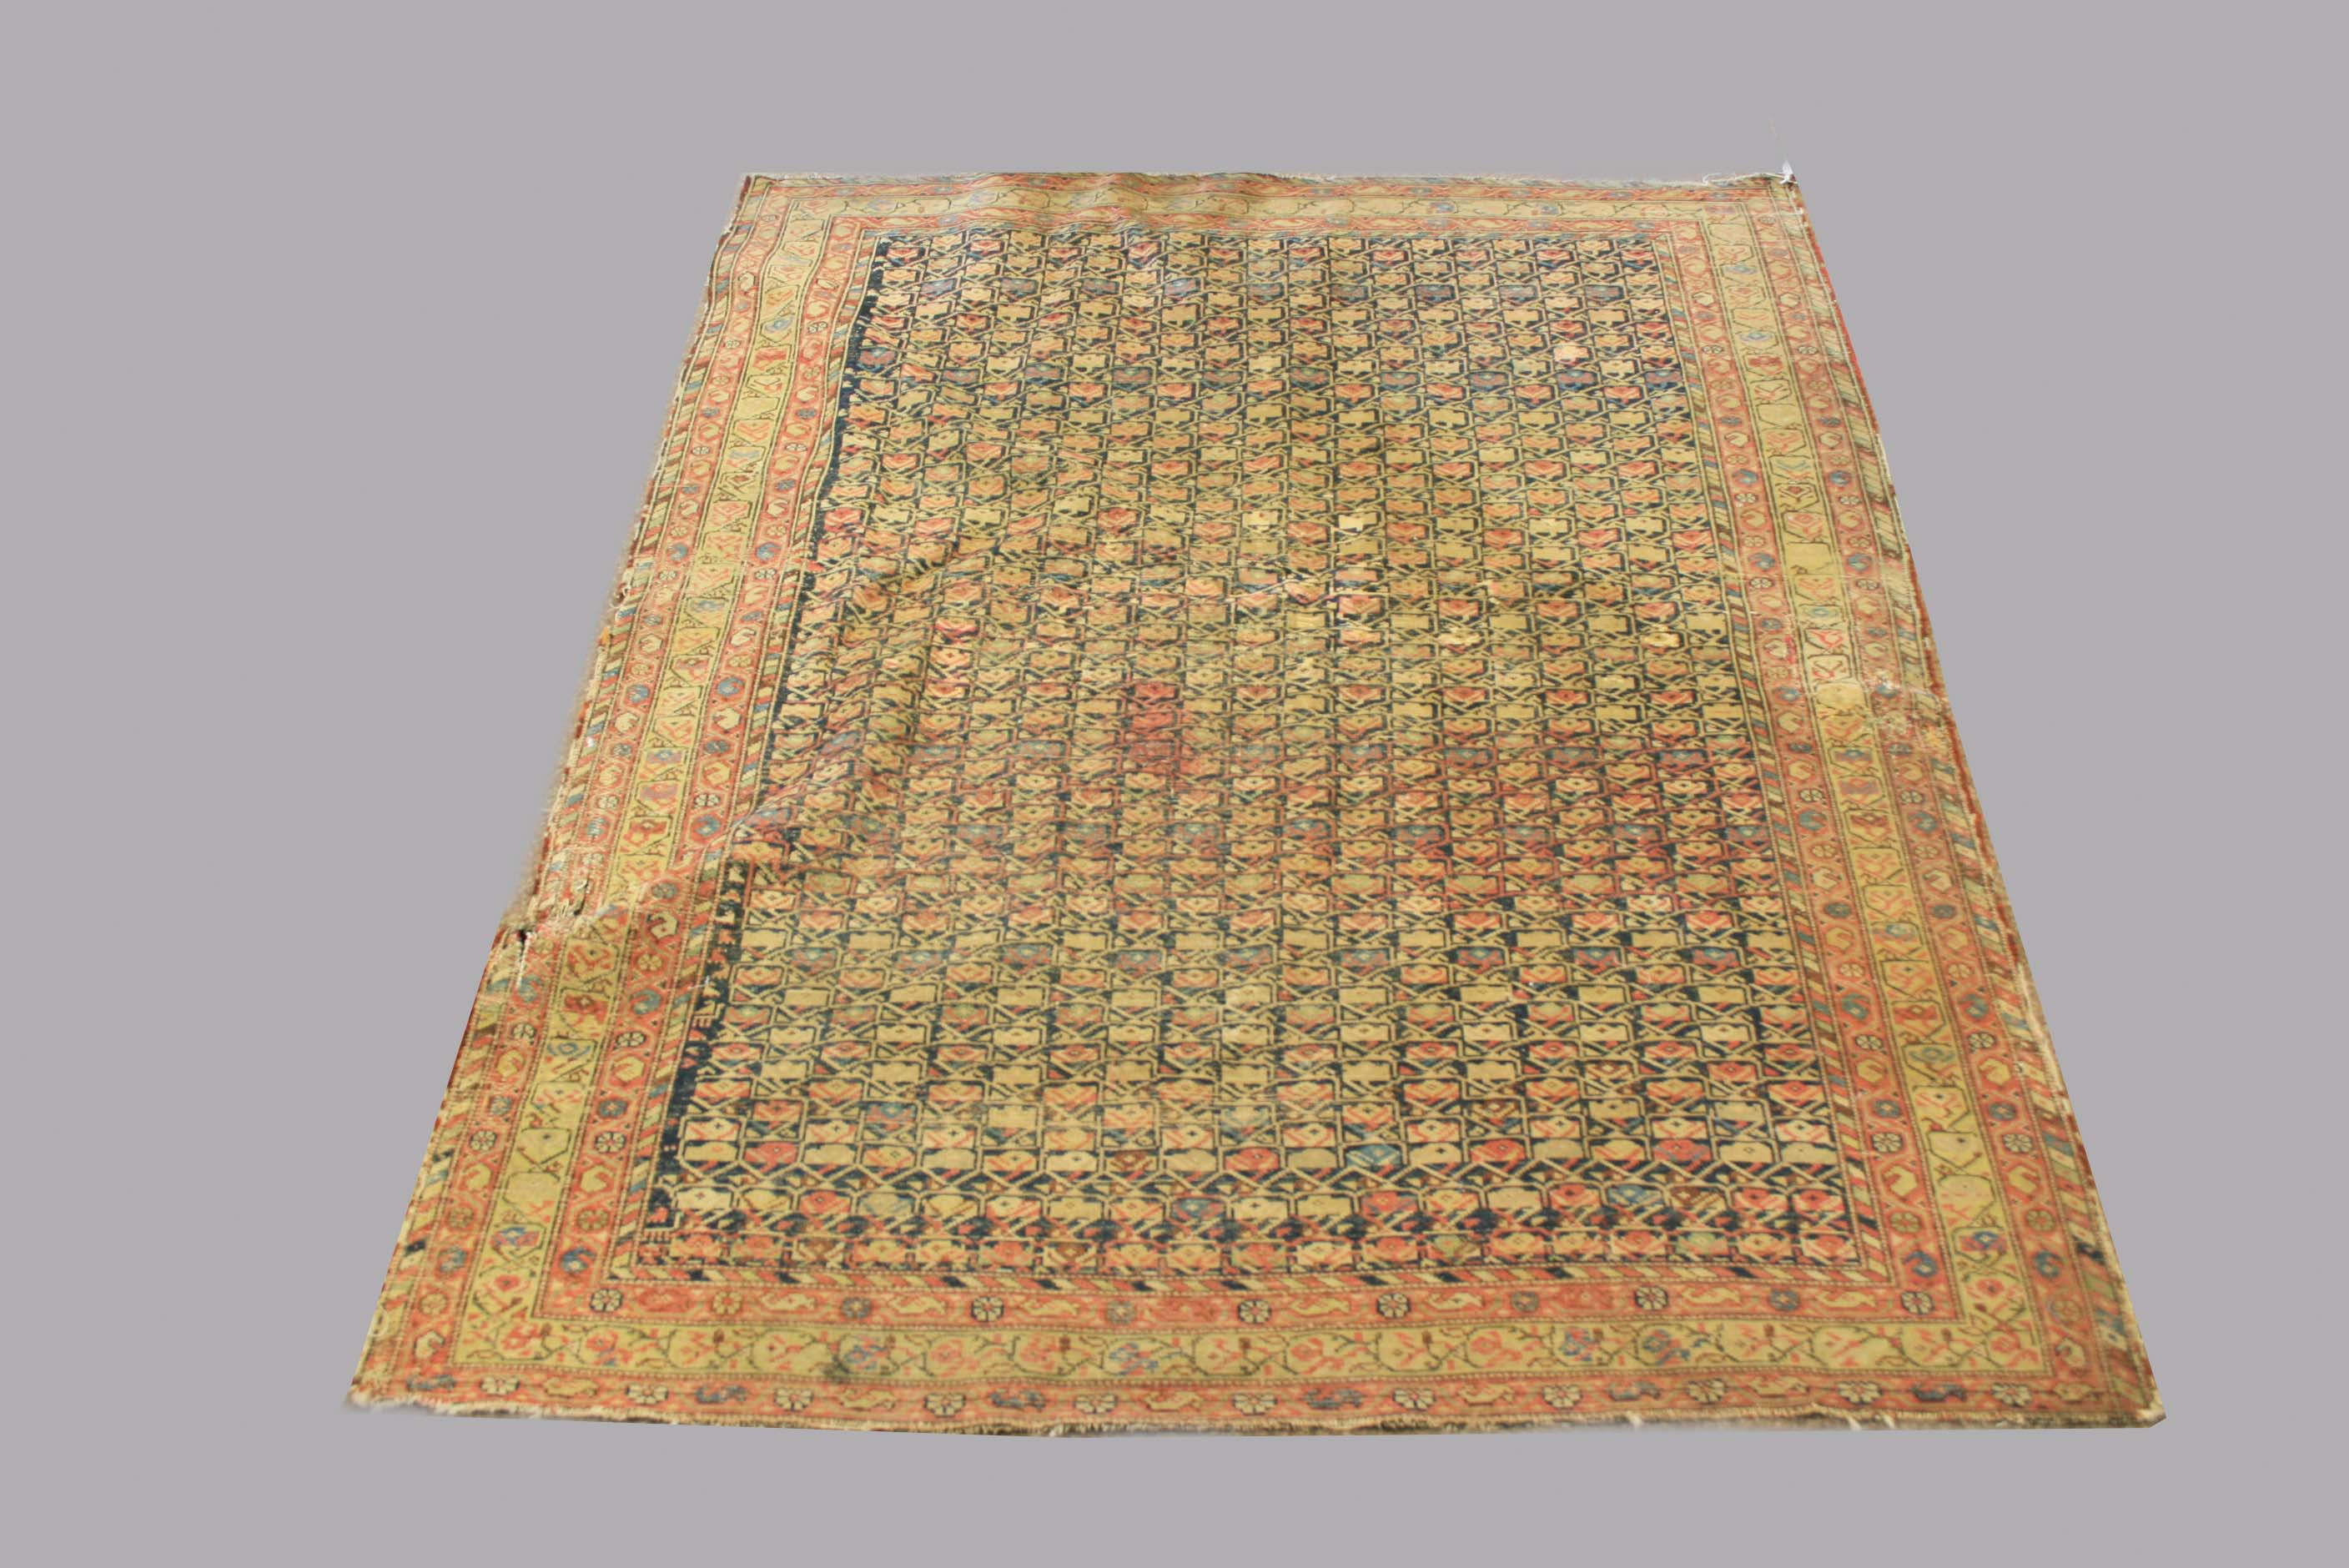 WEST PERSIAN VILLAGE RUG, probably Feraghan Valley, the indigo lattice field with columns of